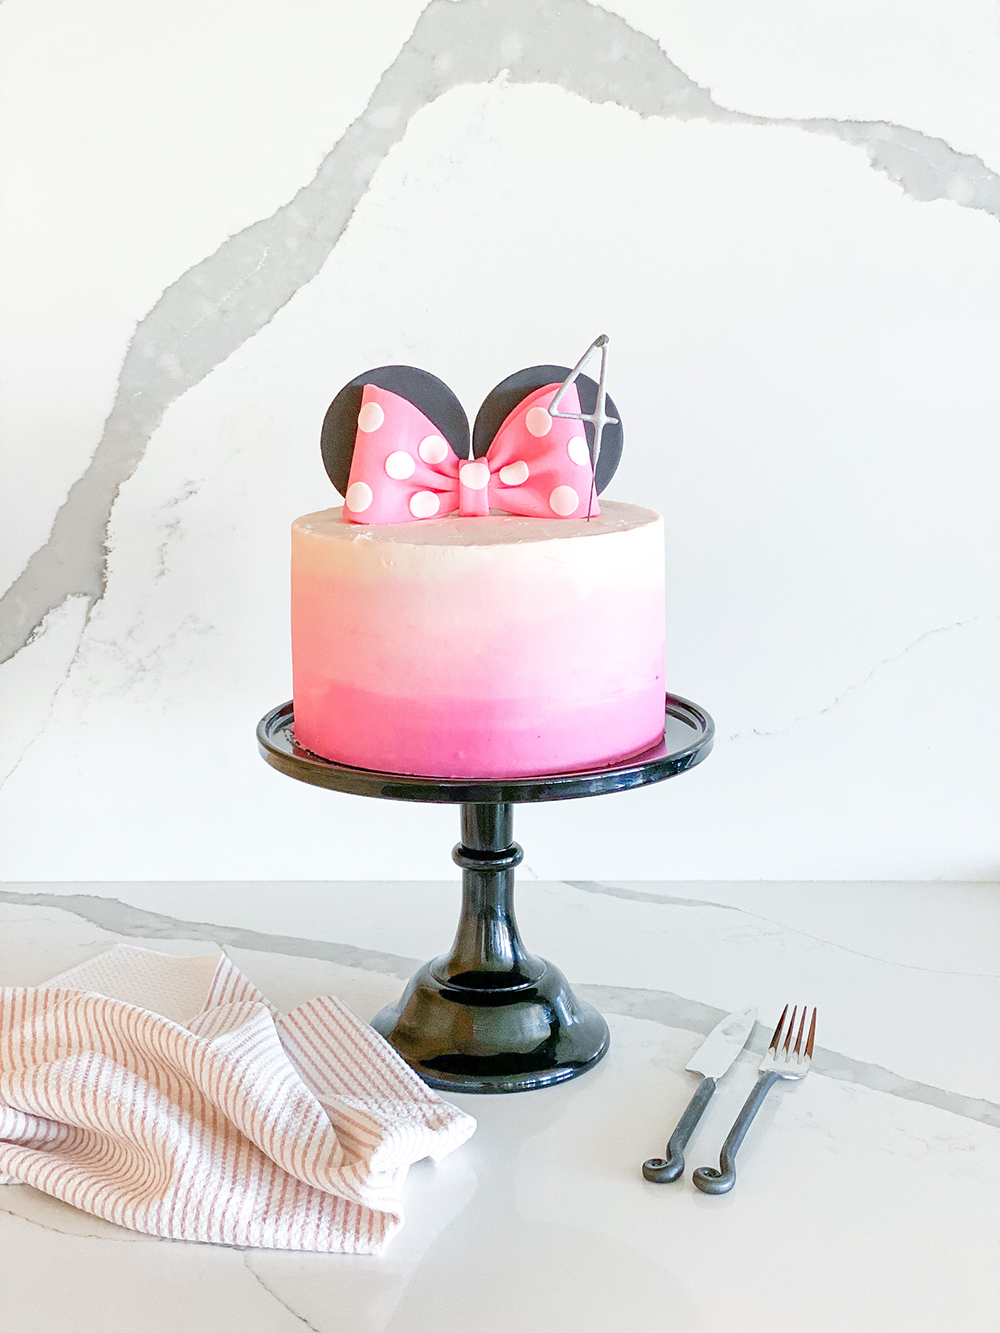 kailee wright minnie mouse cake